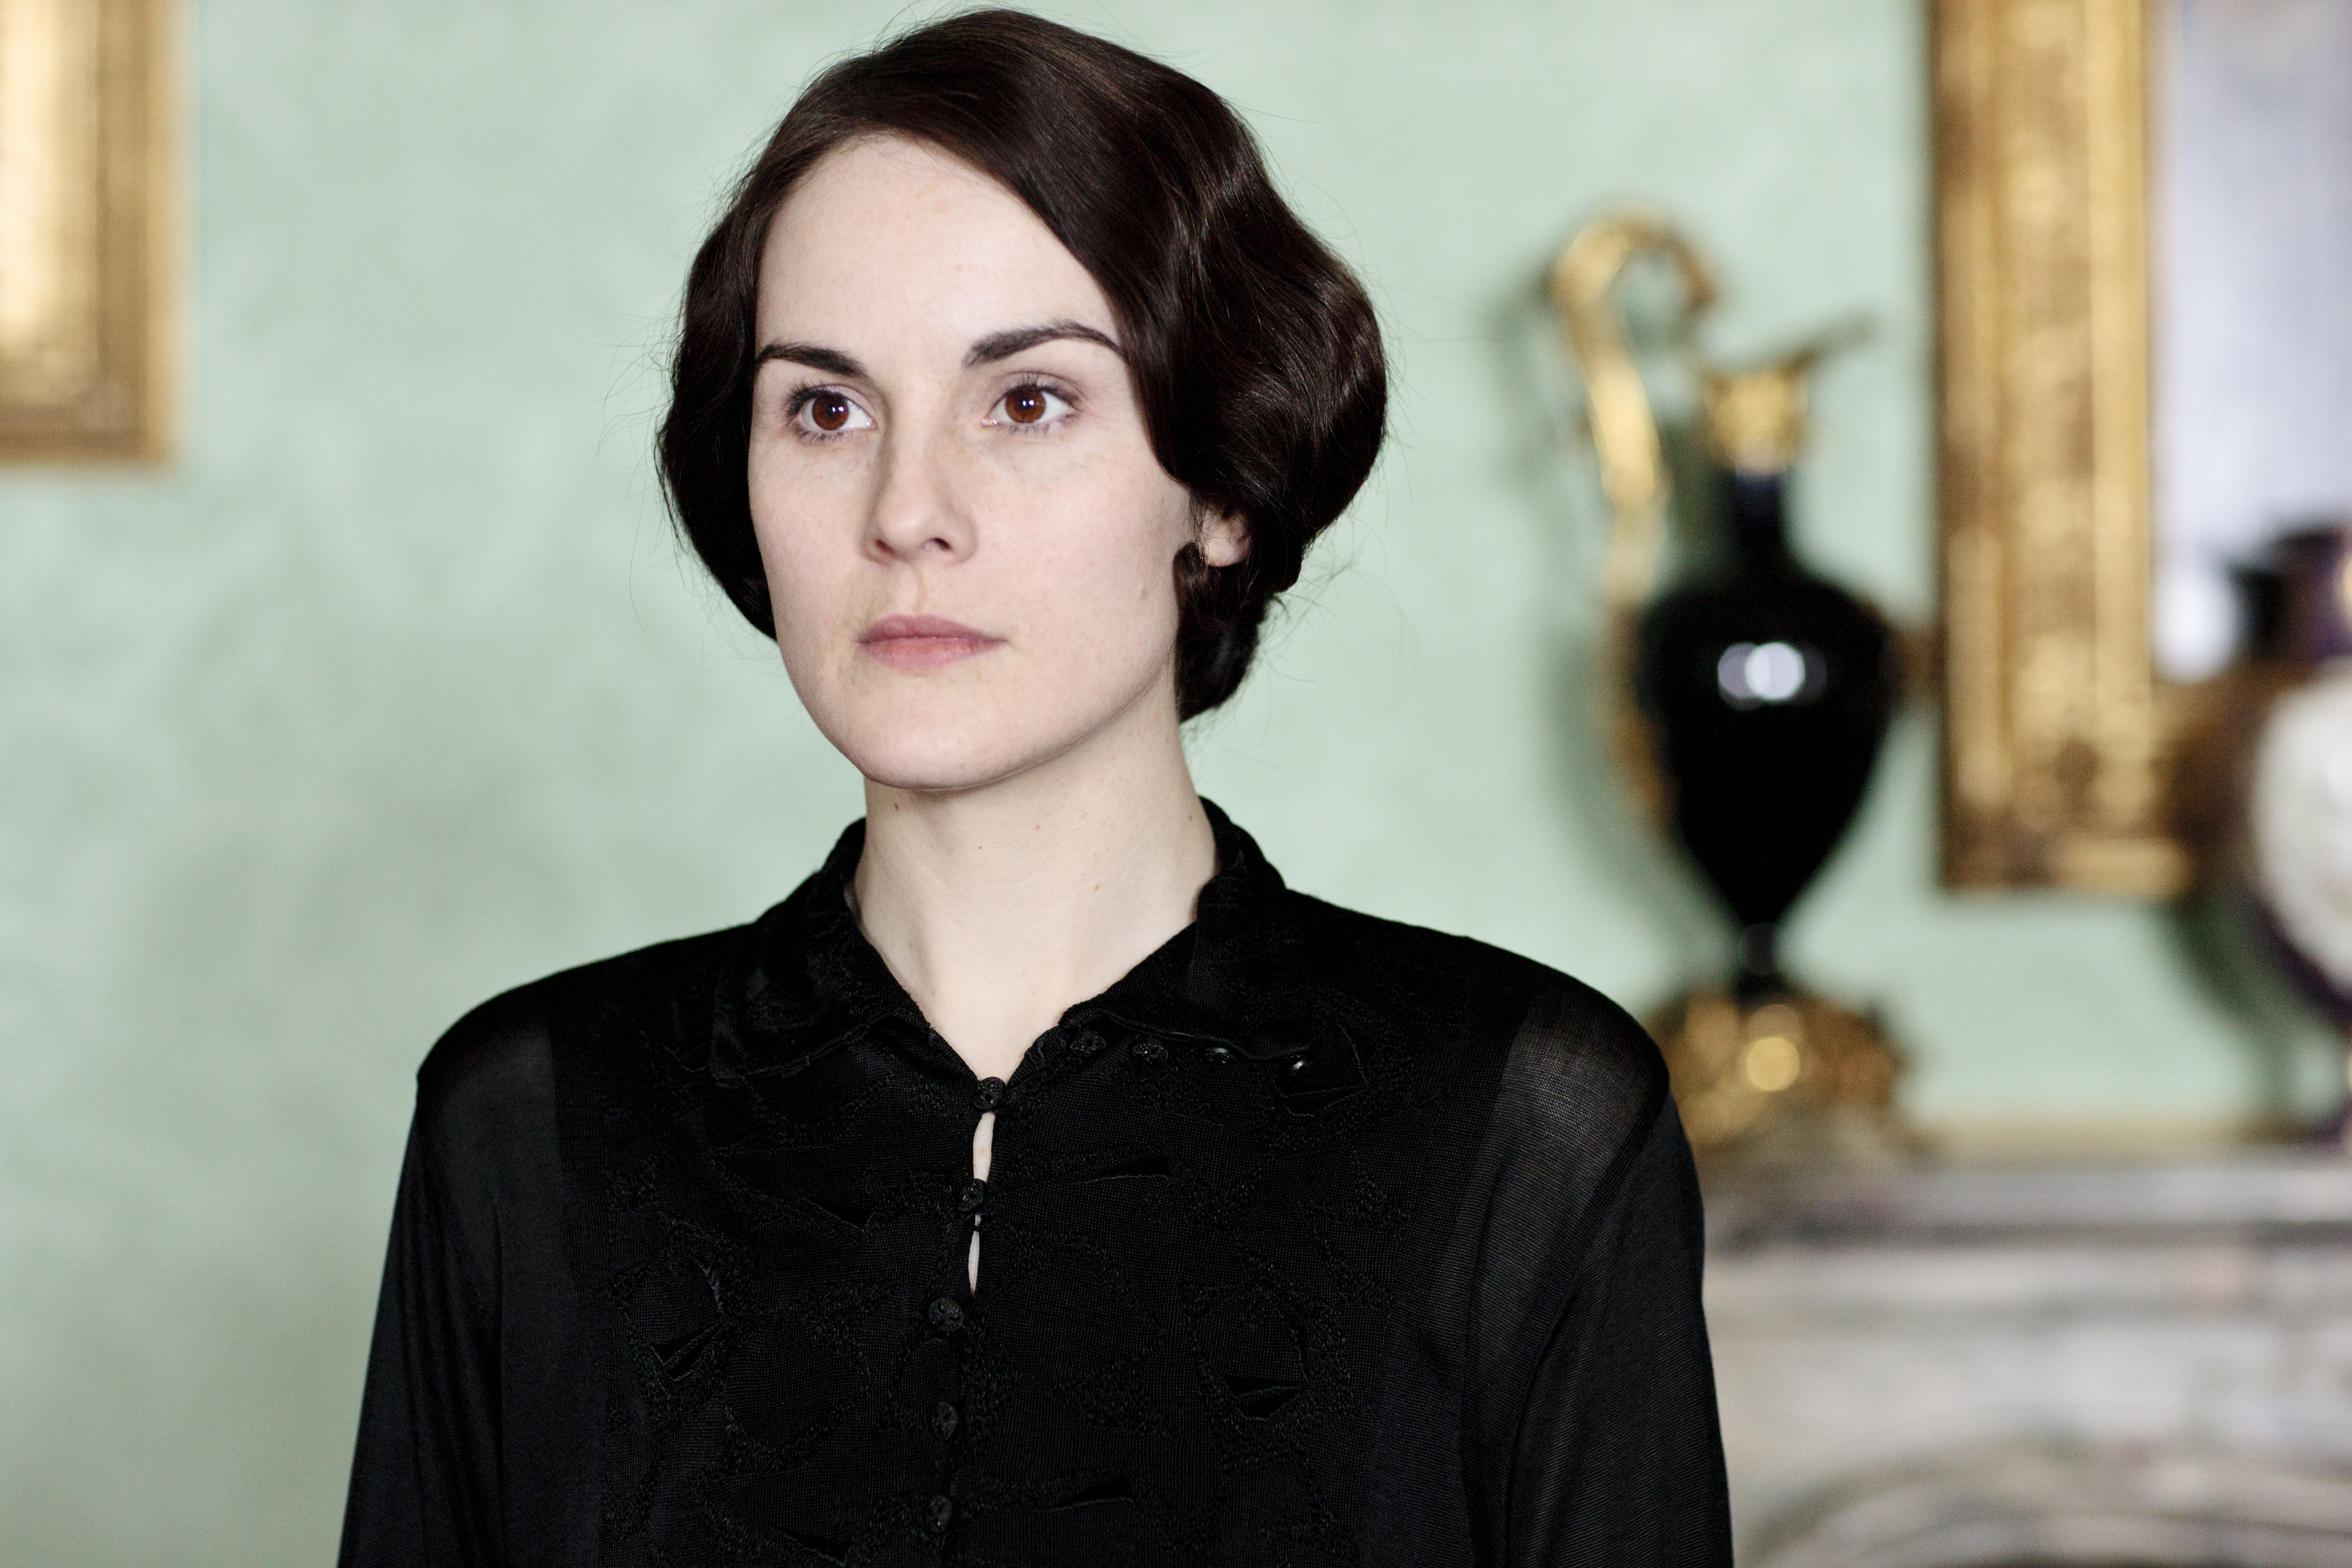 Michelle Dockery in Series 4 (Photo: Courtesy of ©Nick Briggs/Carnival Film and Television Limited 2013 for MASTERPIECE)